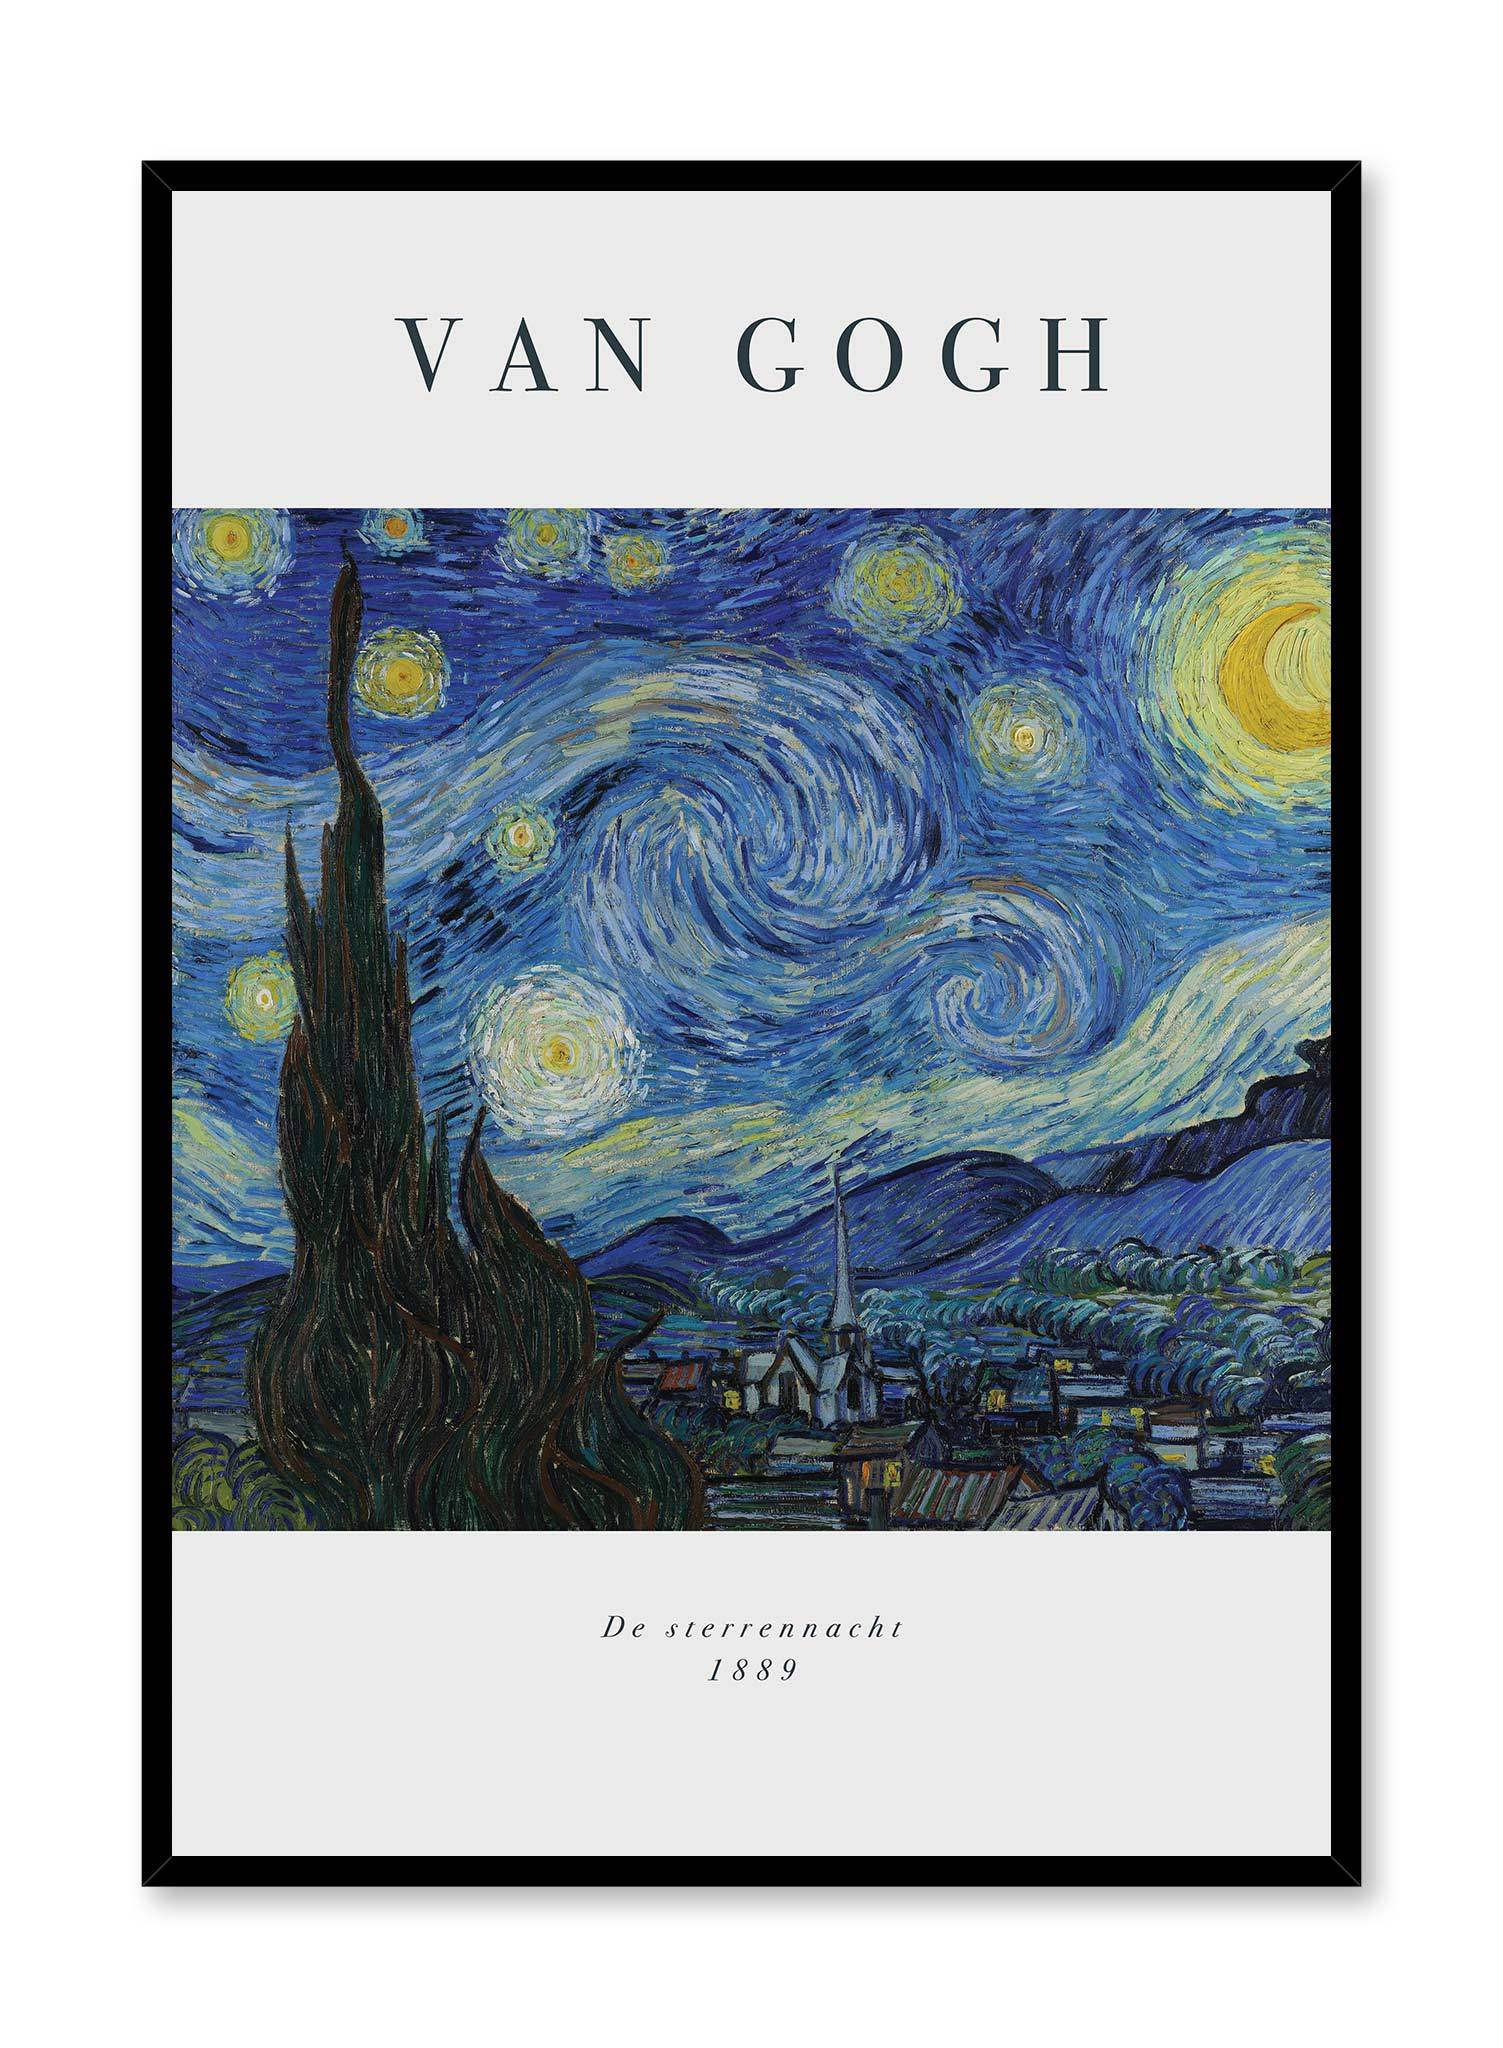 Starry Night is a minimalist artwork by Opposite Wall of Van Gogh's De sterrennacht from 1889.